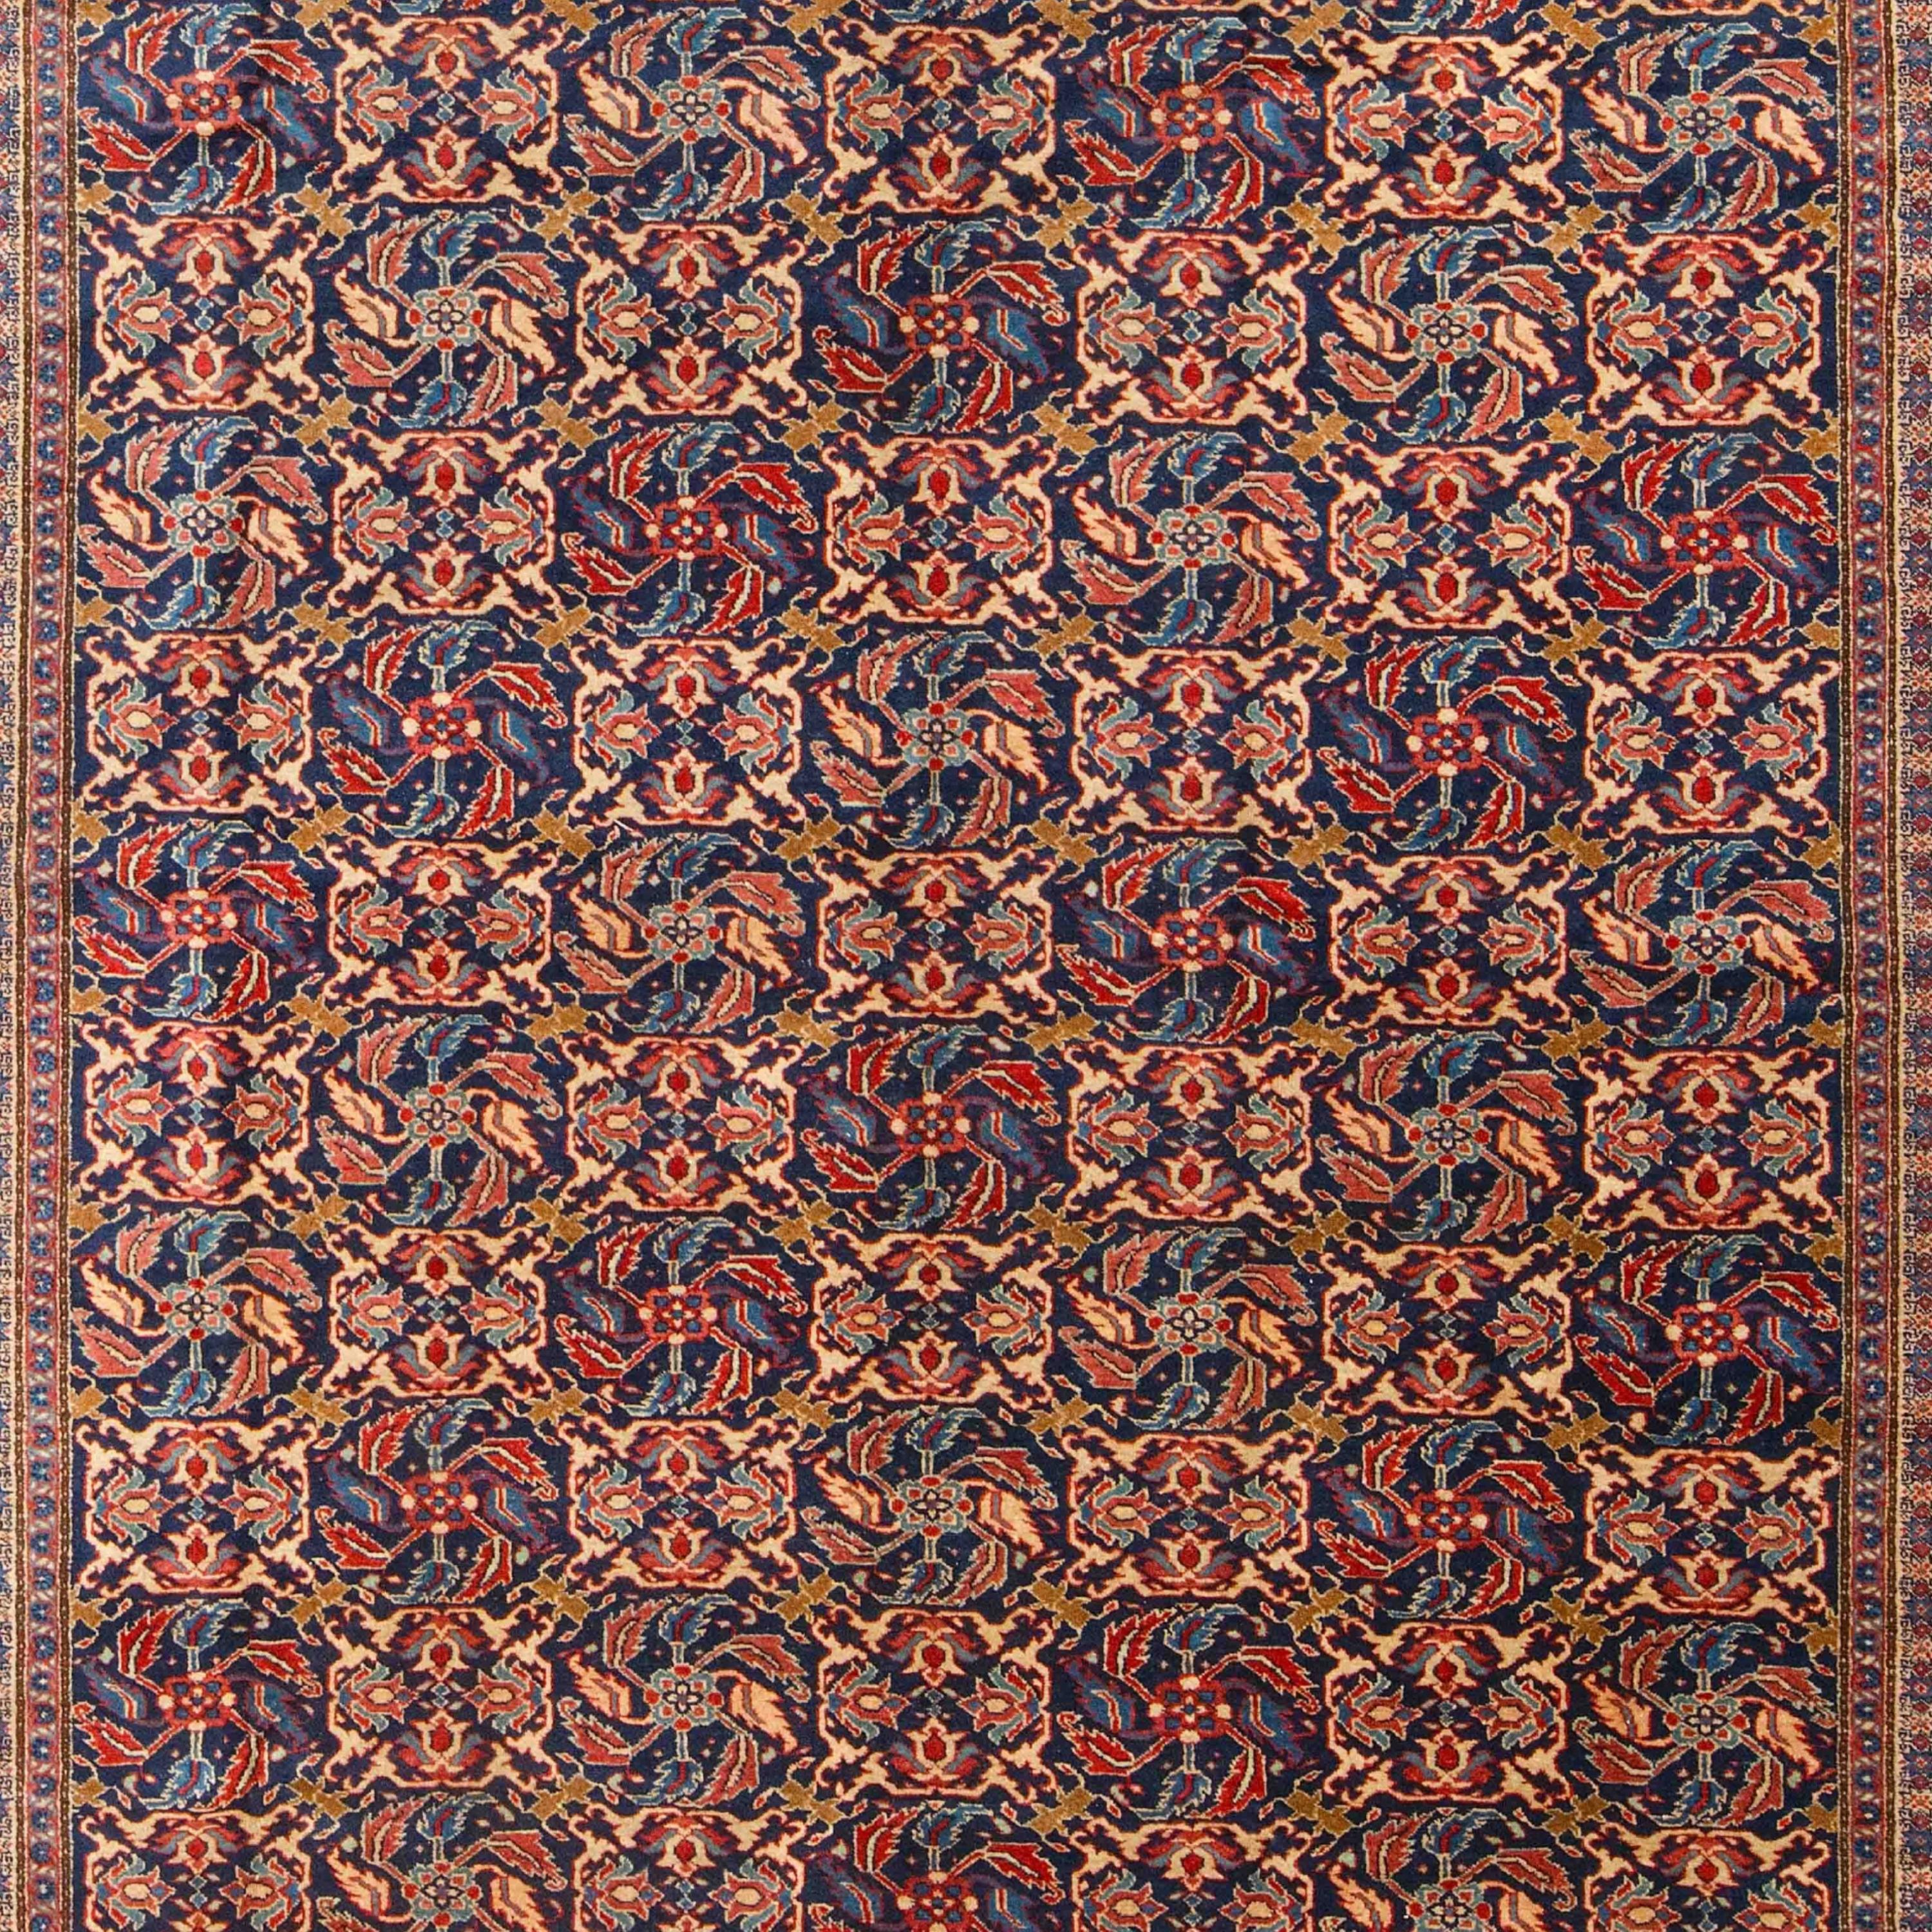 Azerbaijani Antique Ferahan Rug - Late 19th Century Ferahan Carpet in Good Condition For Sale